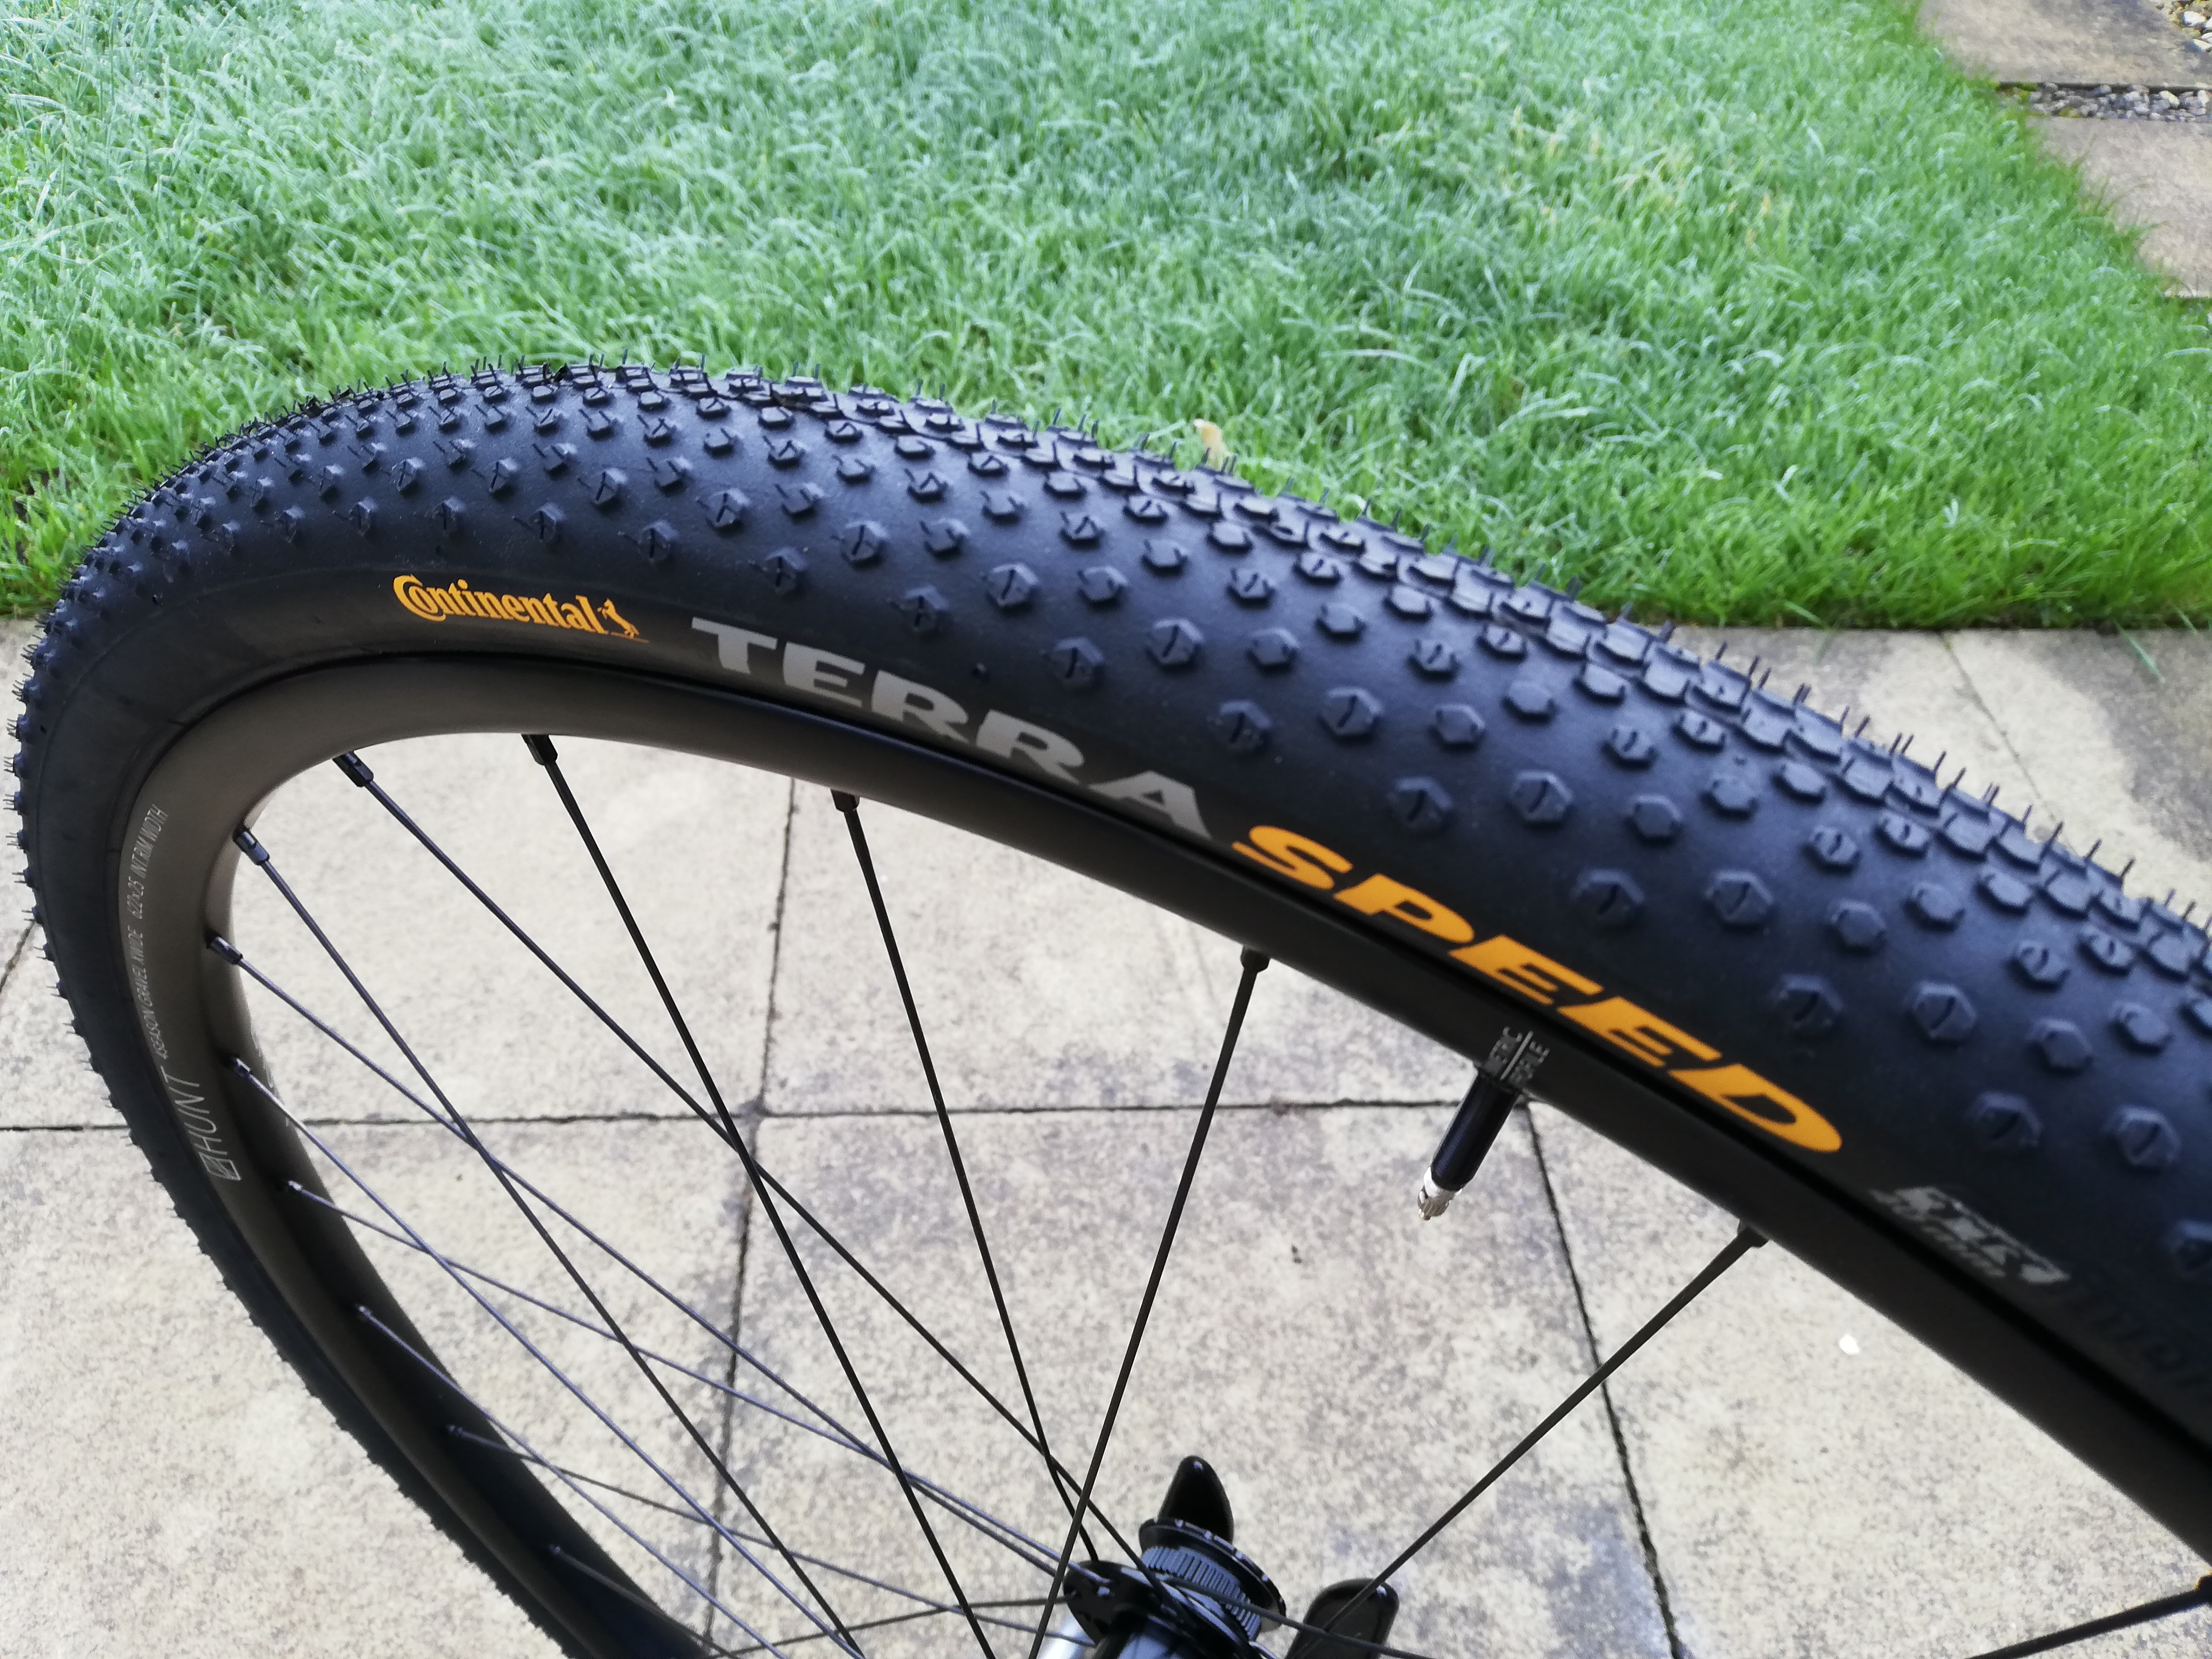 continental cyclocross speed 700x35c